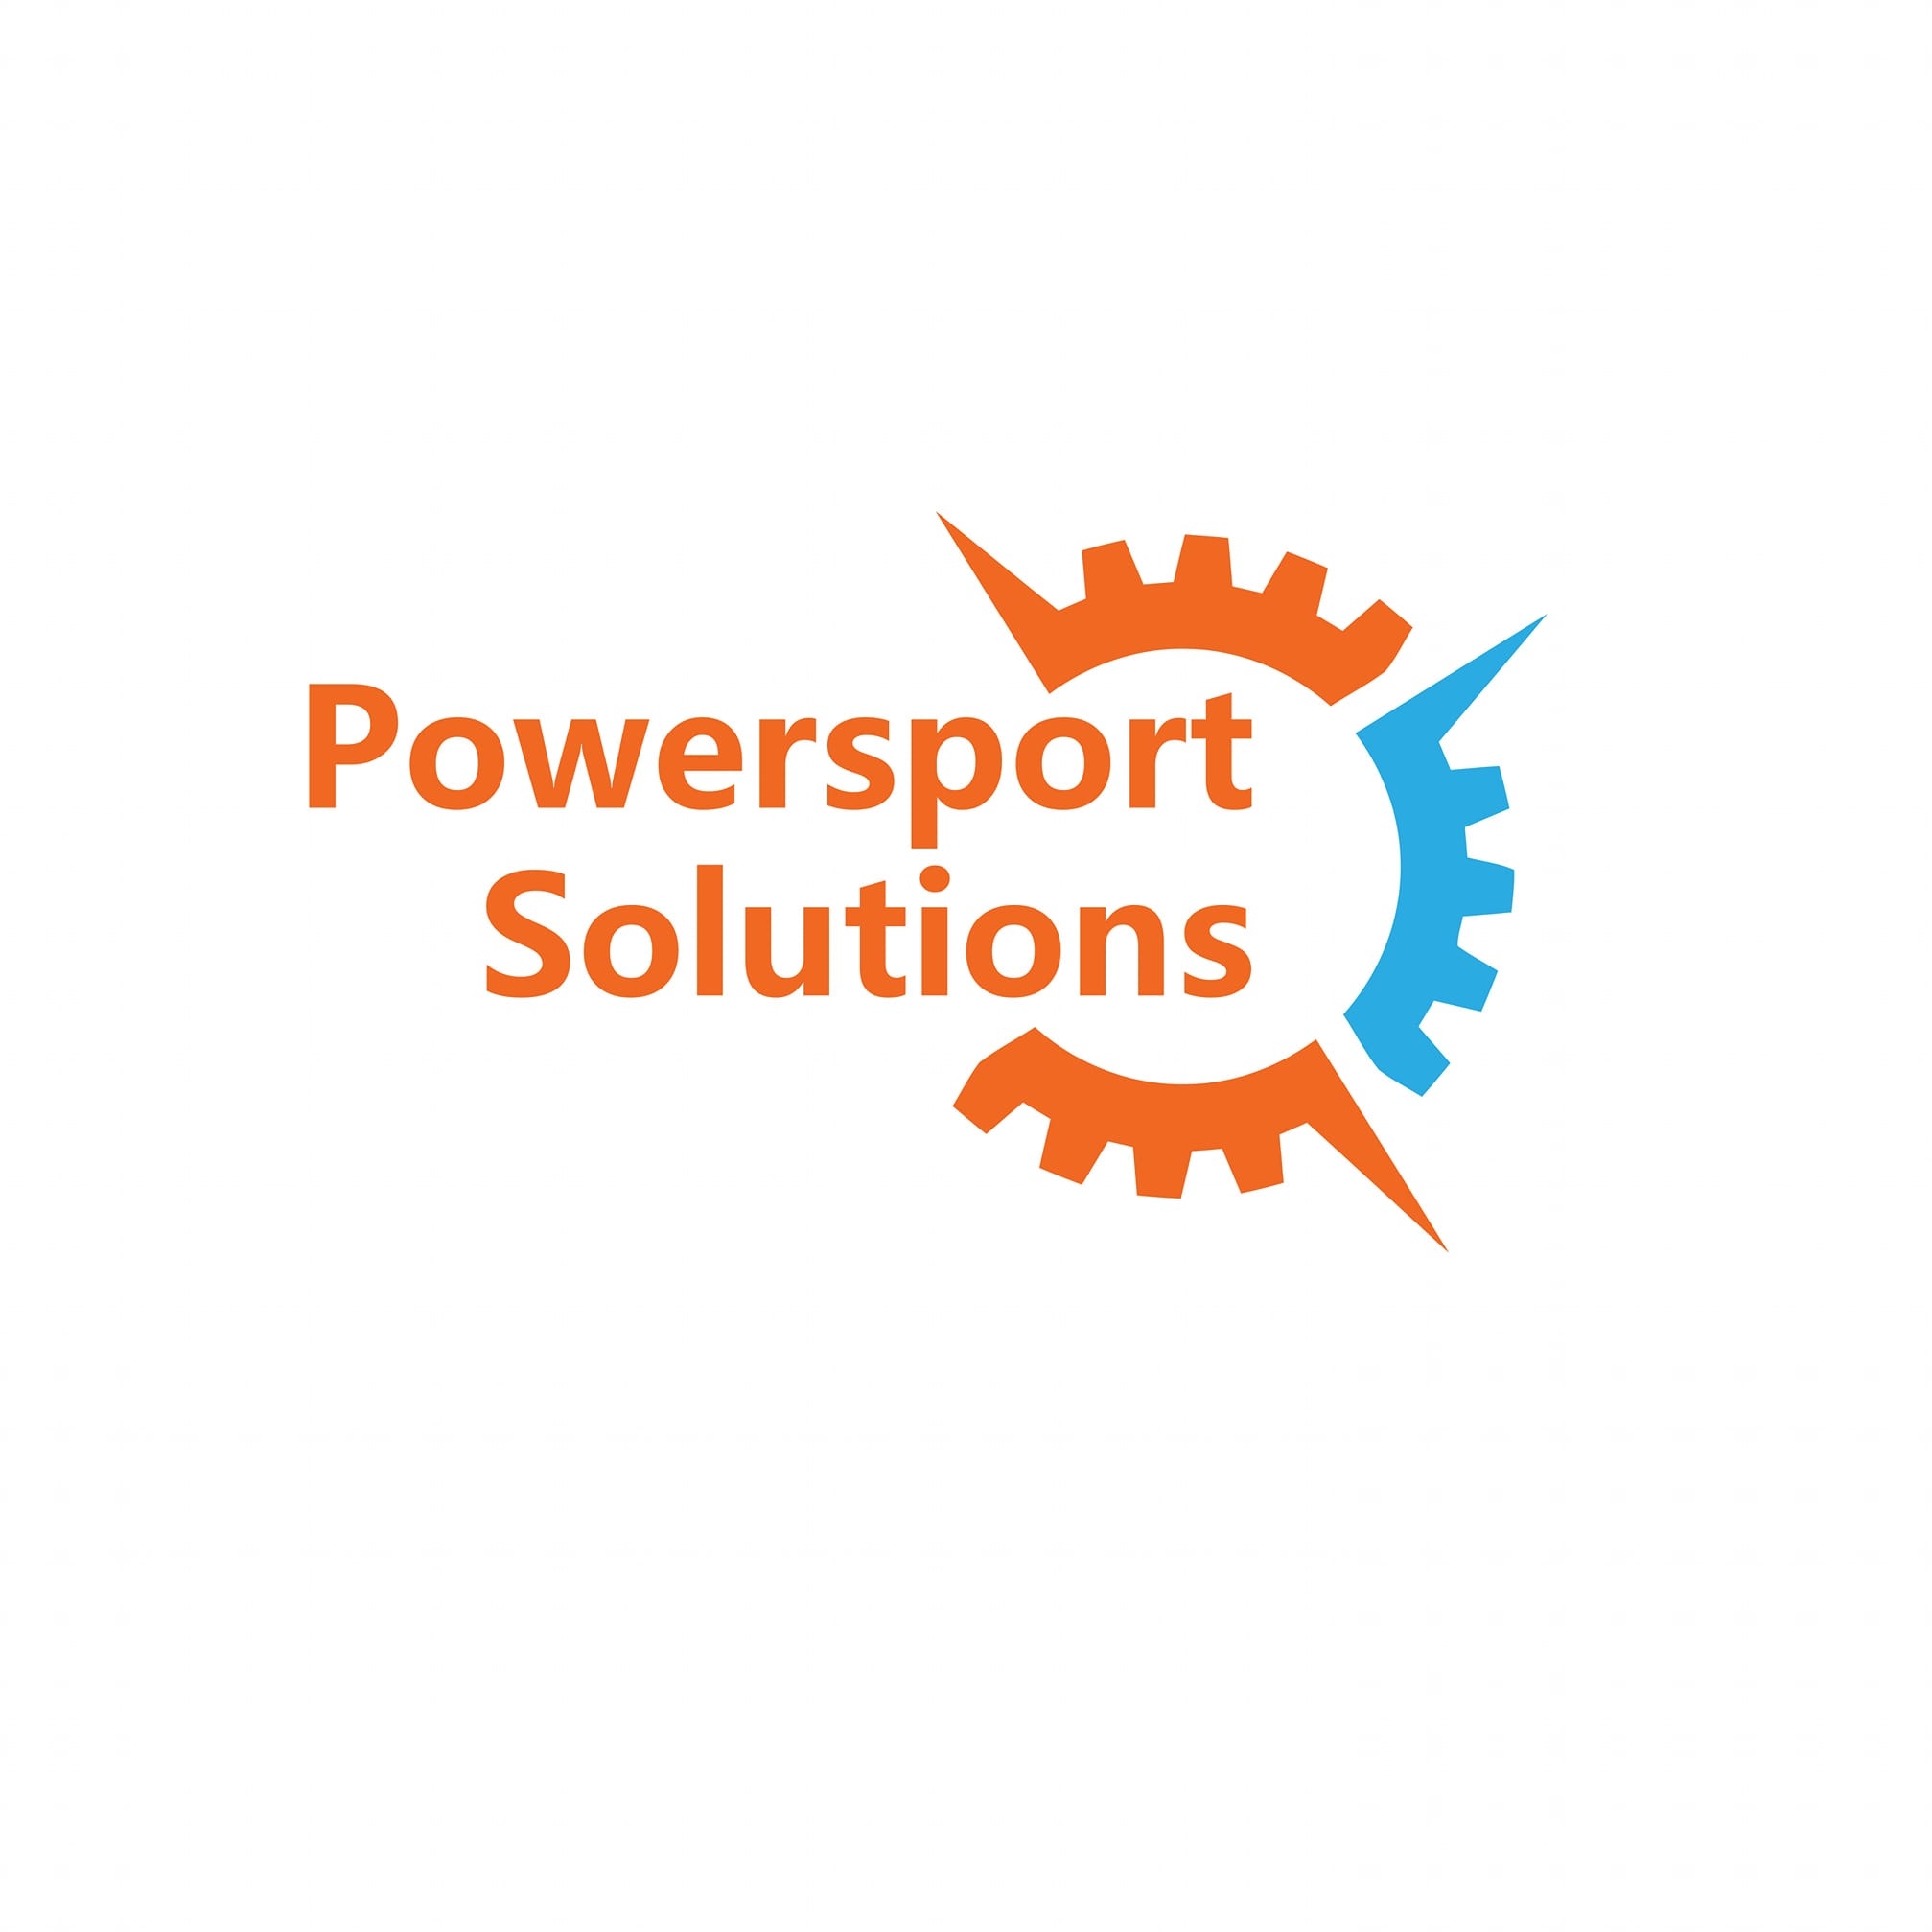 Powersport Solutions - Belize, Central America